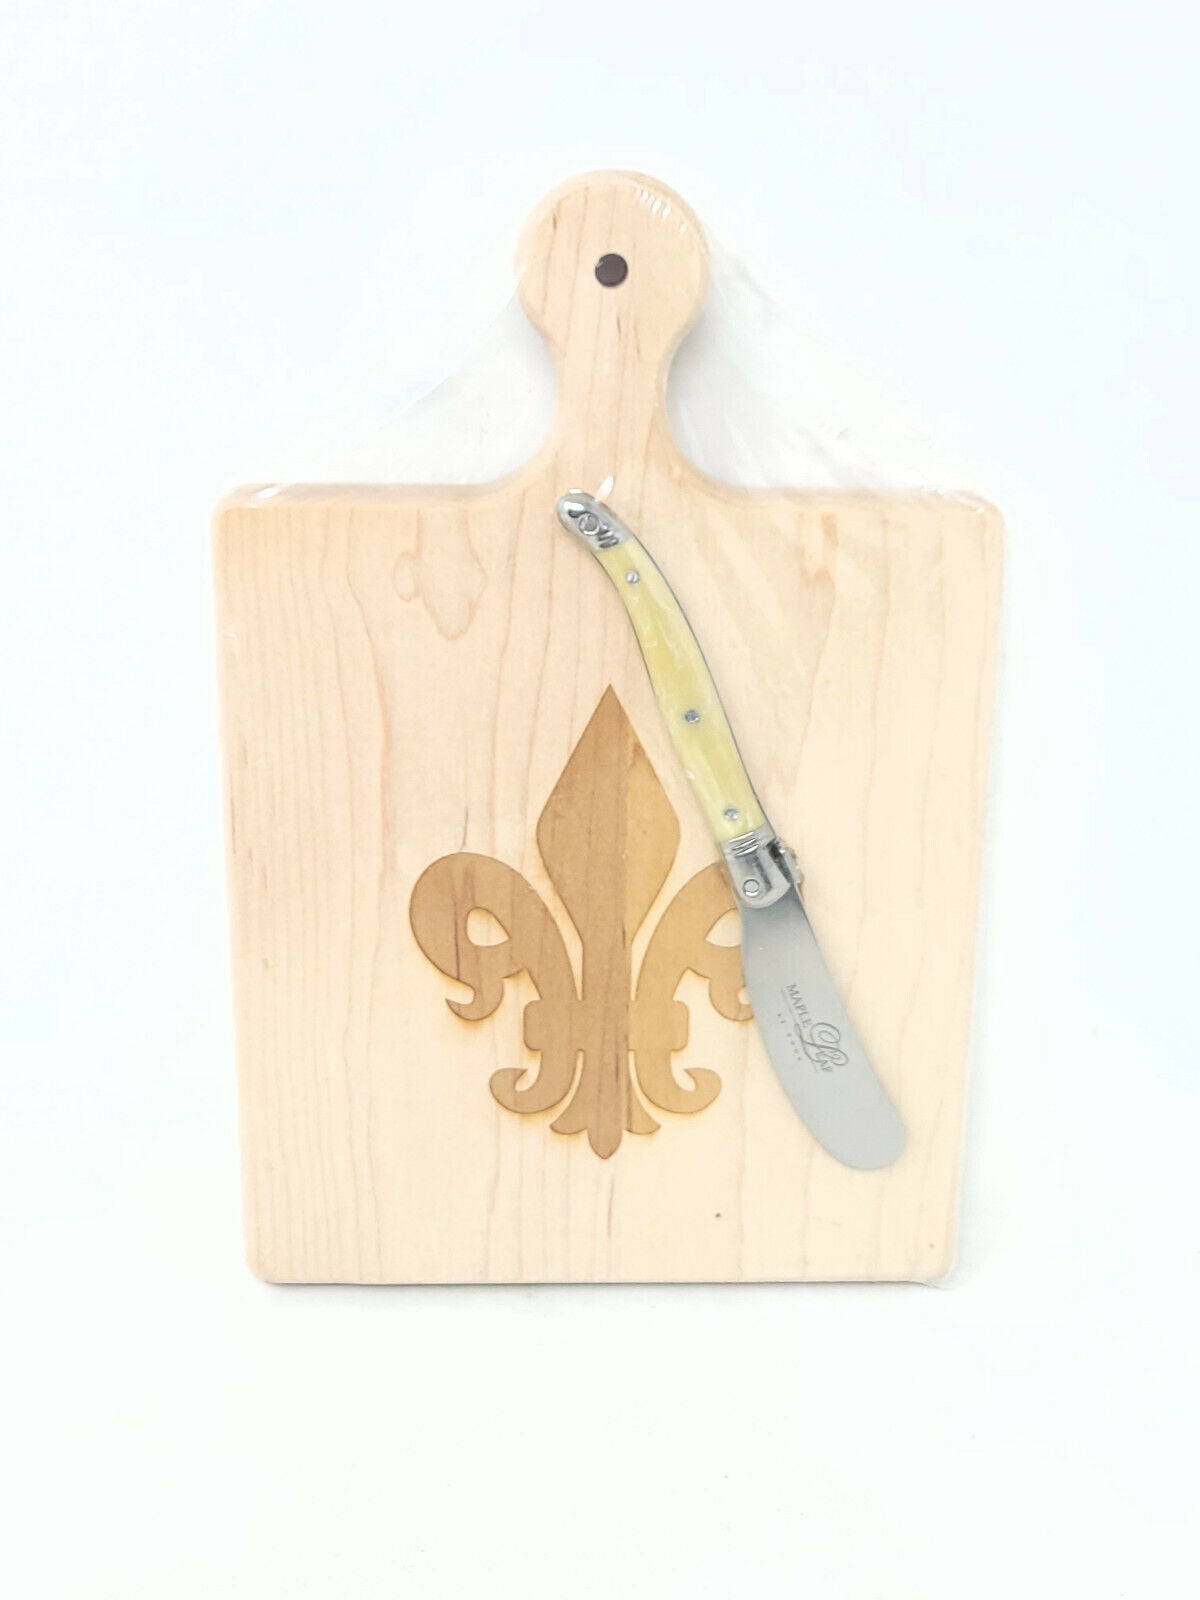 Maple Leaf at Home Wood 6 x 7" Square Serving Cutting Board - Fleur-de-lis - NEW